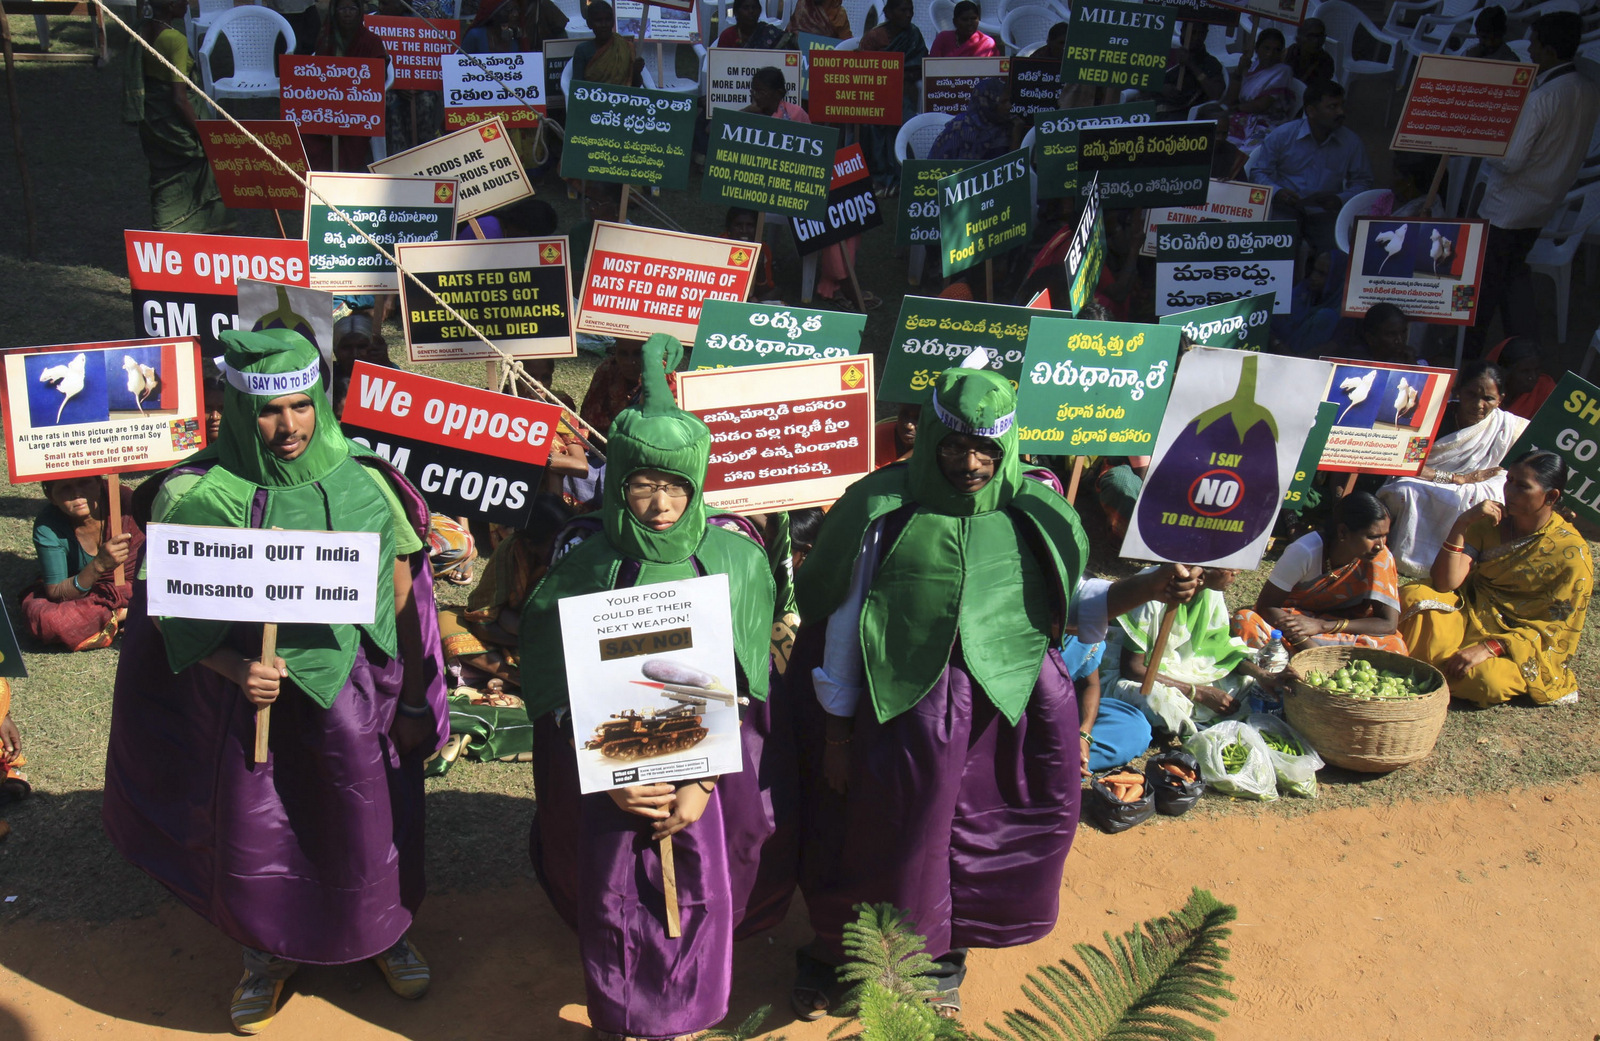 Farmers hold signs as activists dressed as Bt brinjal eggplants, look on at a protest during Indian Environment Minister Jairam Ramesh's visit to attend a public hearing on the genetically modified eggplant crop at Central Research Institute for Dryland Agriculture in Hyderabad, India.(AP/Mahesh Kumar)